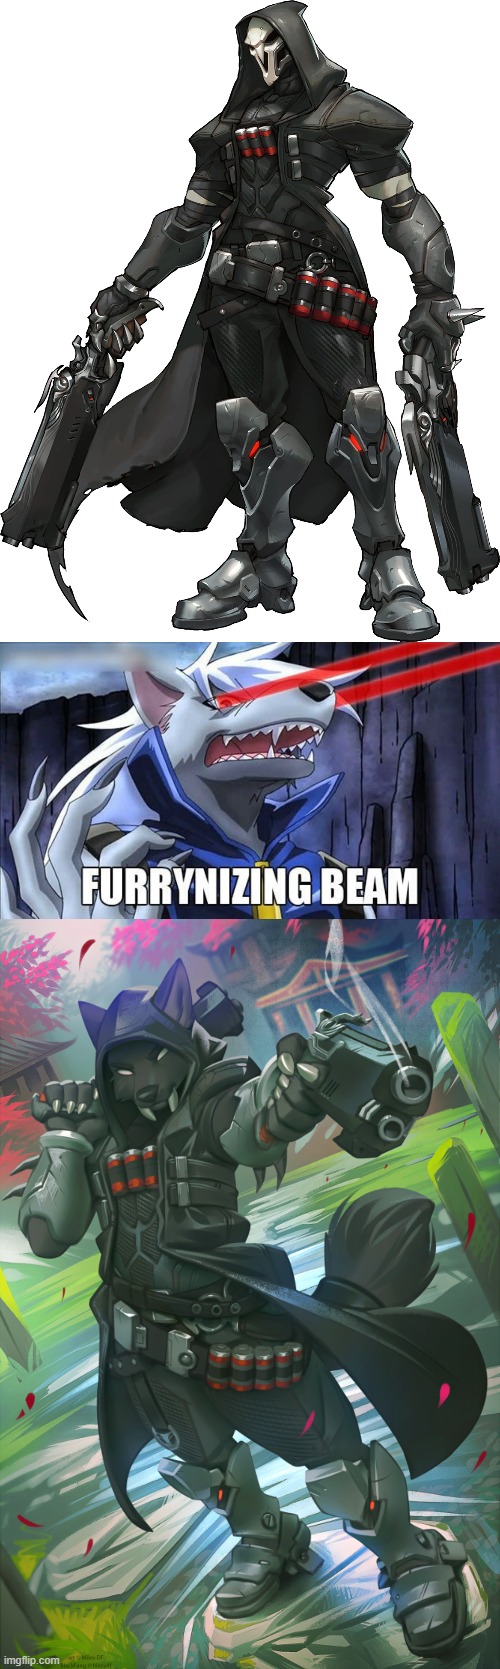 Finally! The MVP! (By Miles-DF) | image tagged in furrynizing beam,furry,overwatch,reaper,memes,finally | made w/ Imgflip meme maker